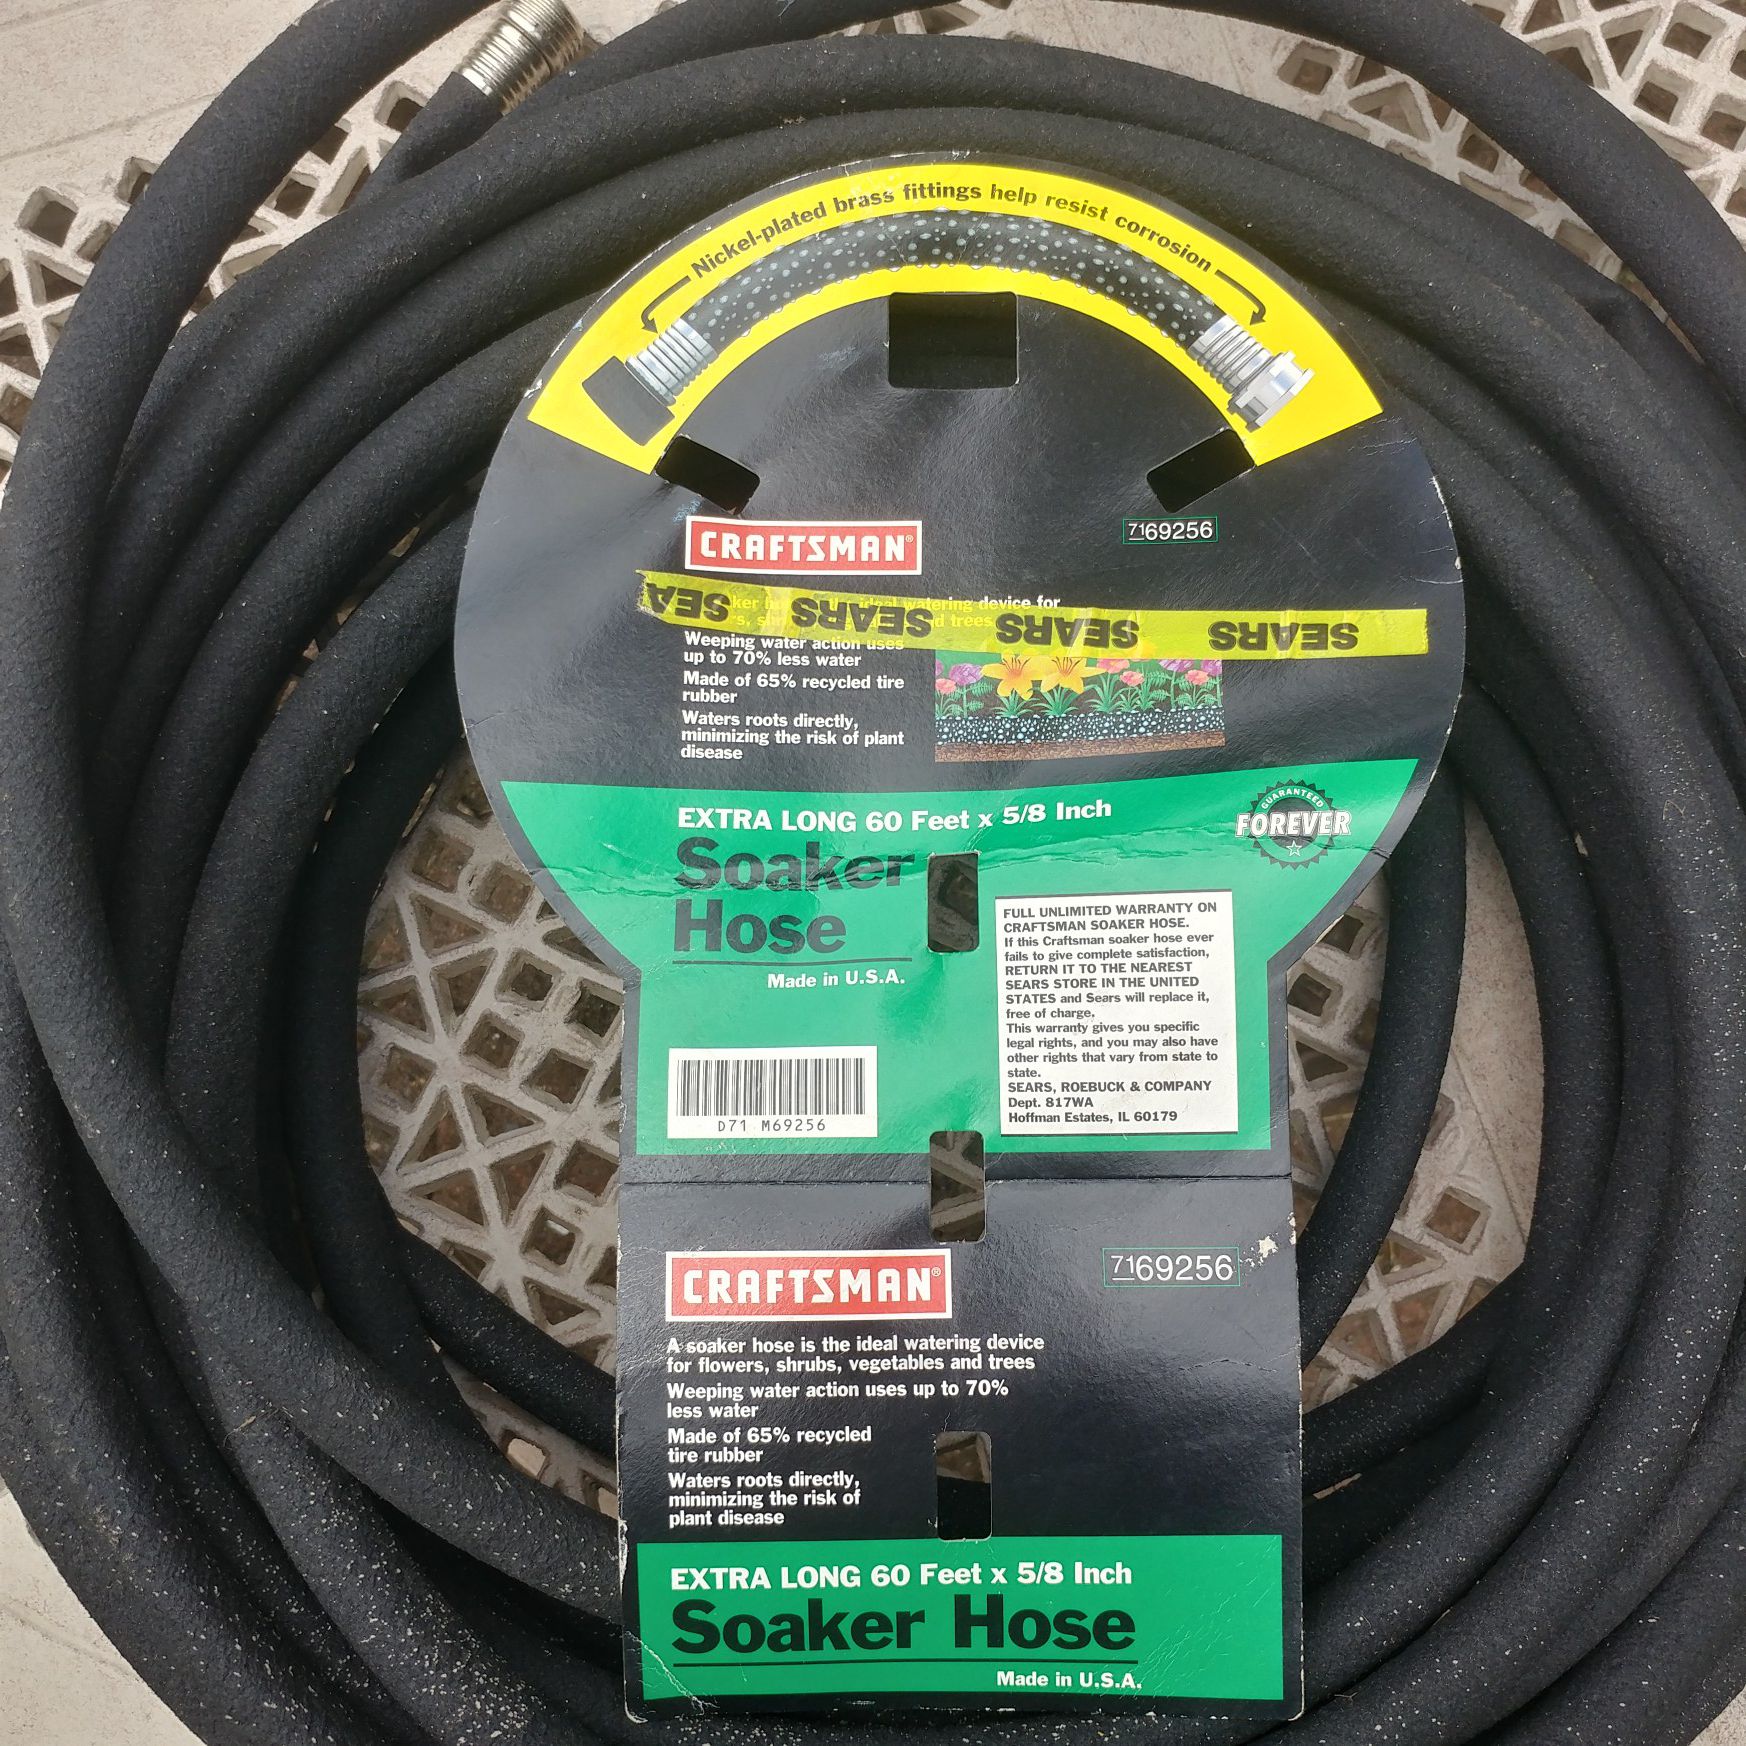 Garden water soaker hose 5/8" x 60 feet, by Craftsman. Ideal sprinkler tool watering hose for lawn irrigation